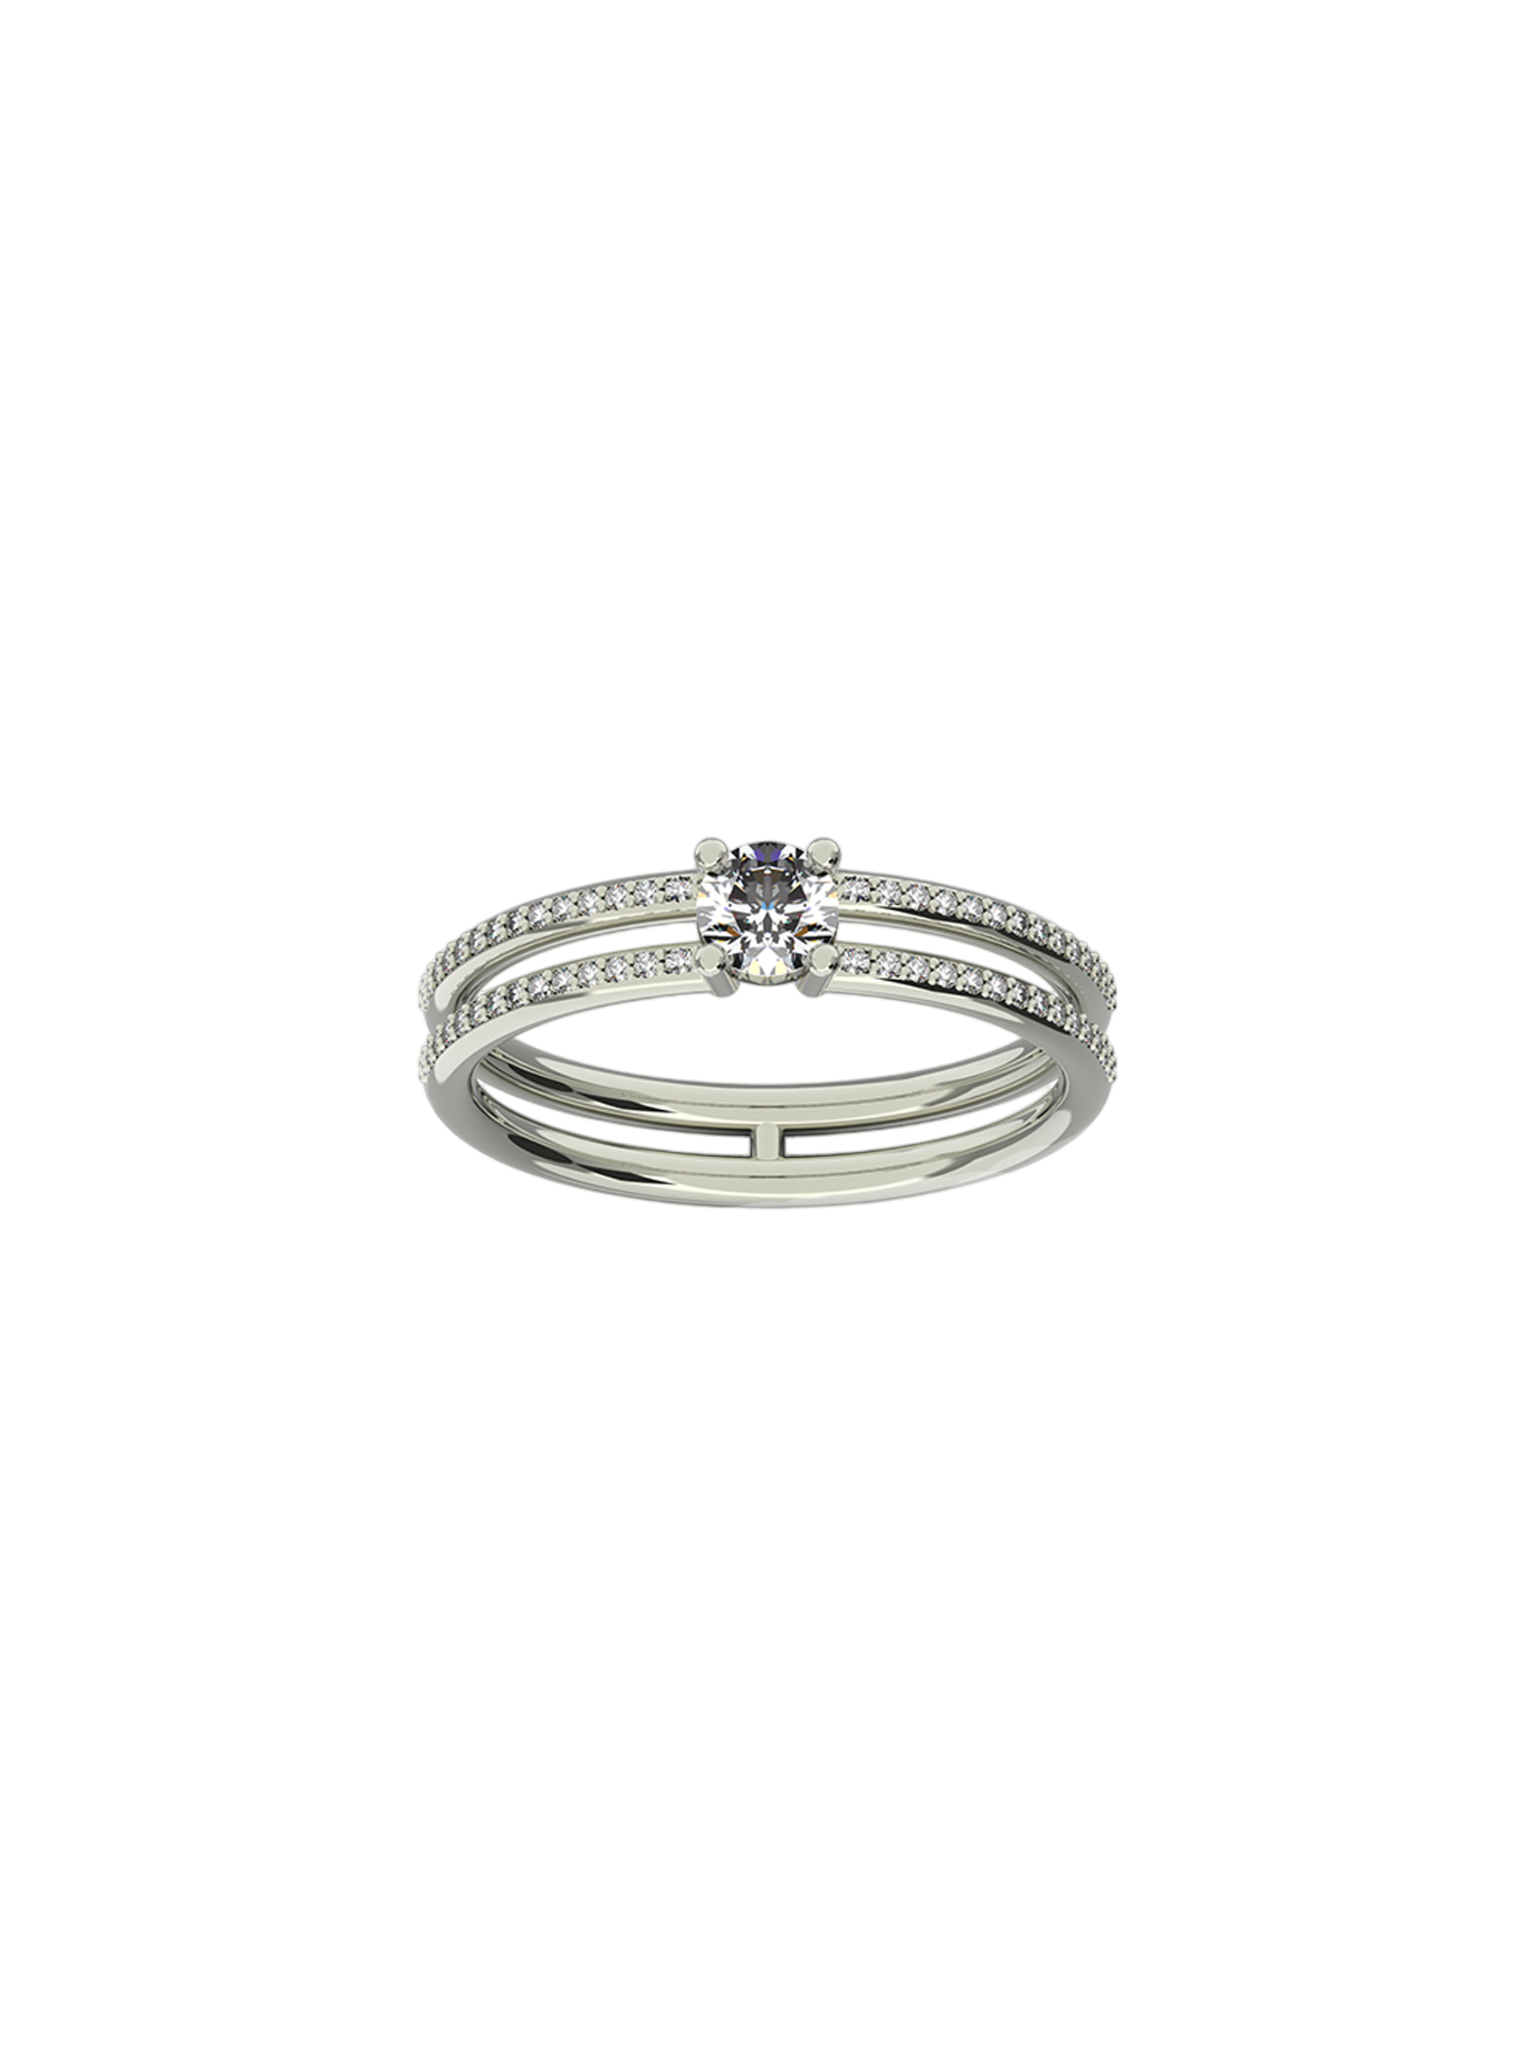 Double band pave ring 0.25 carat